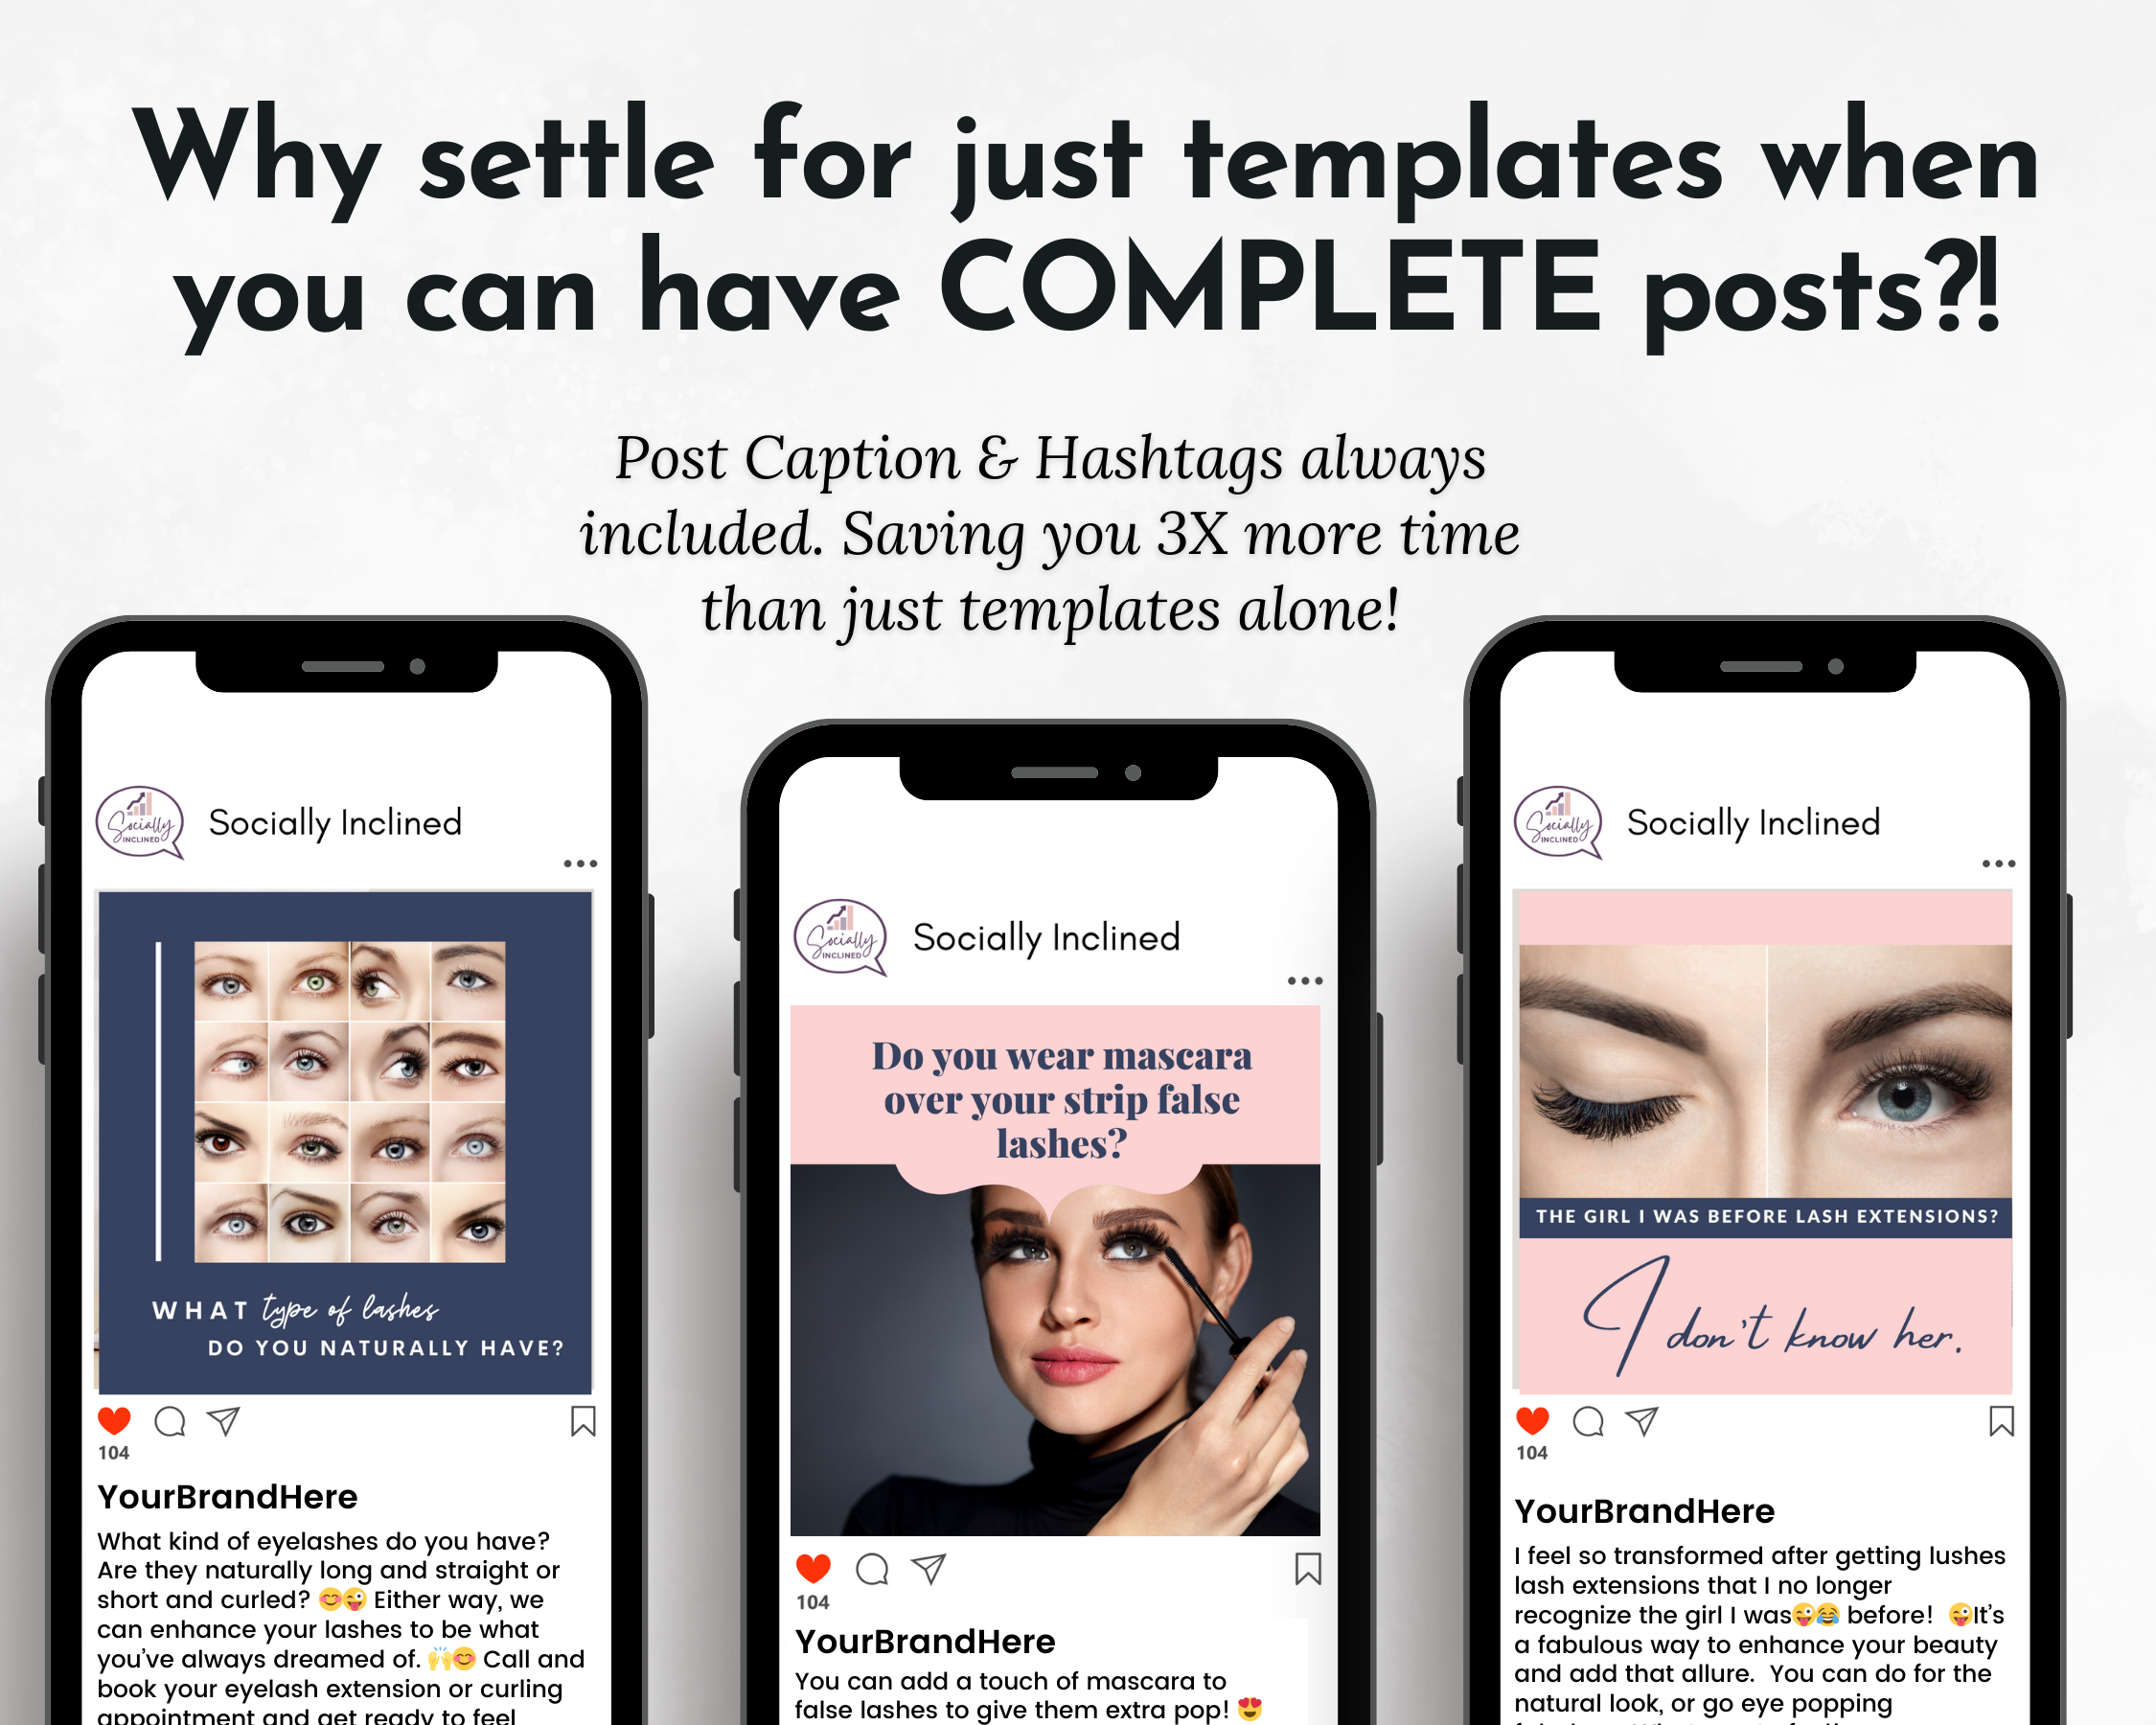 A set of Eyelashes Social Media Post Bundle with Canva Templates optimized with social media game templates to attract new Socially Inclined clients through complete post SEO keywords.